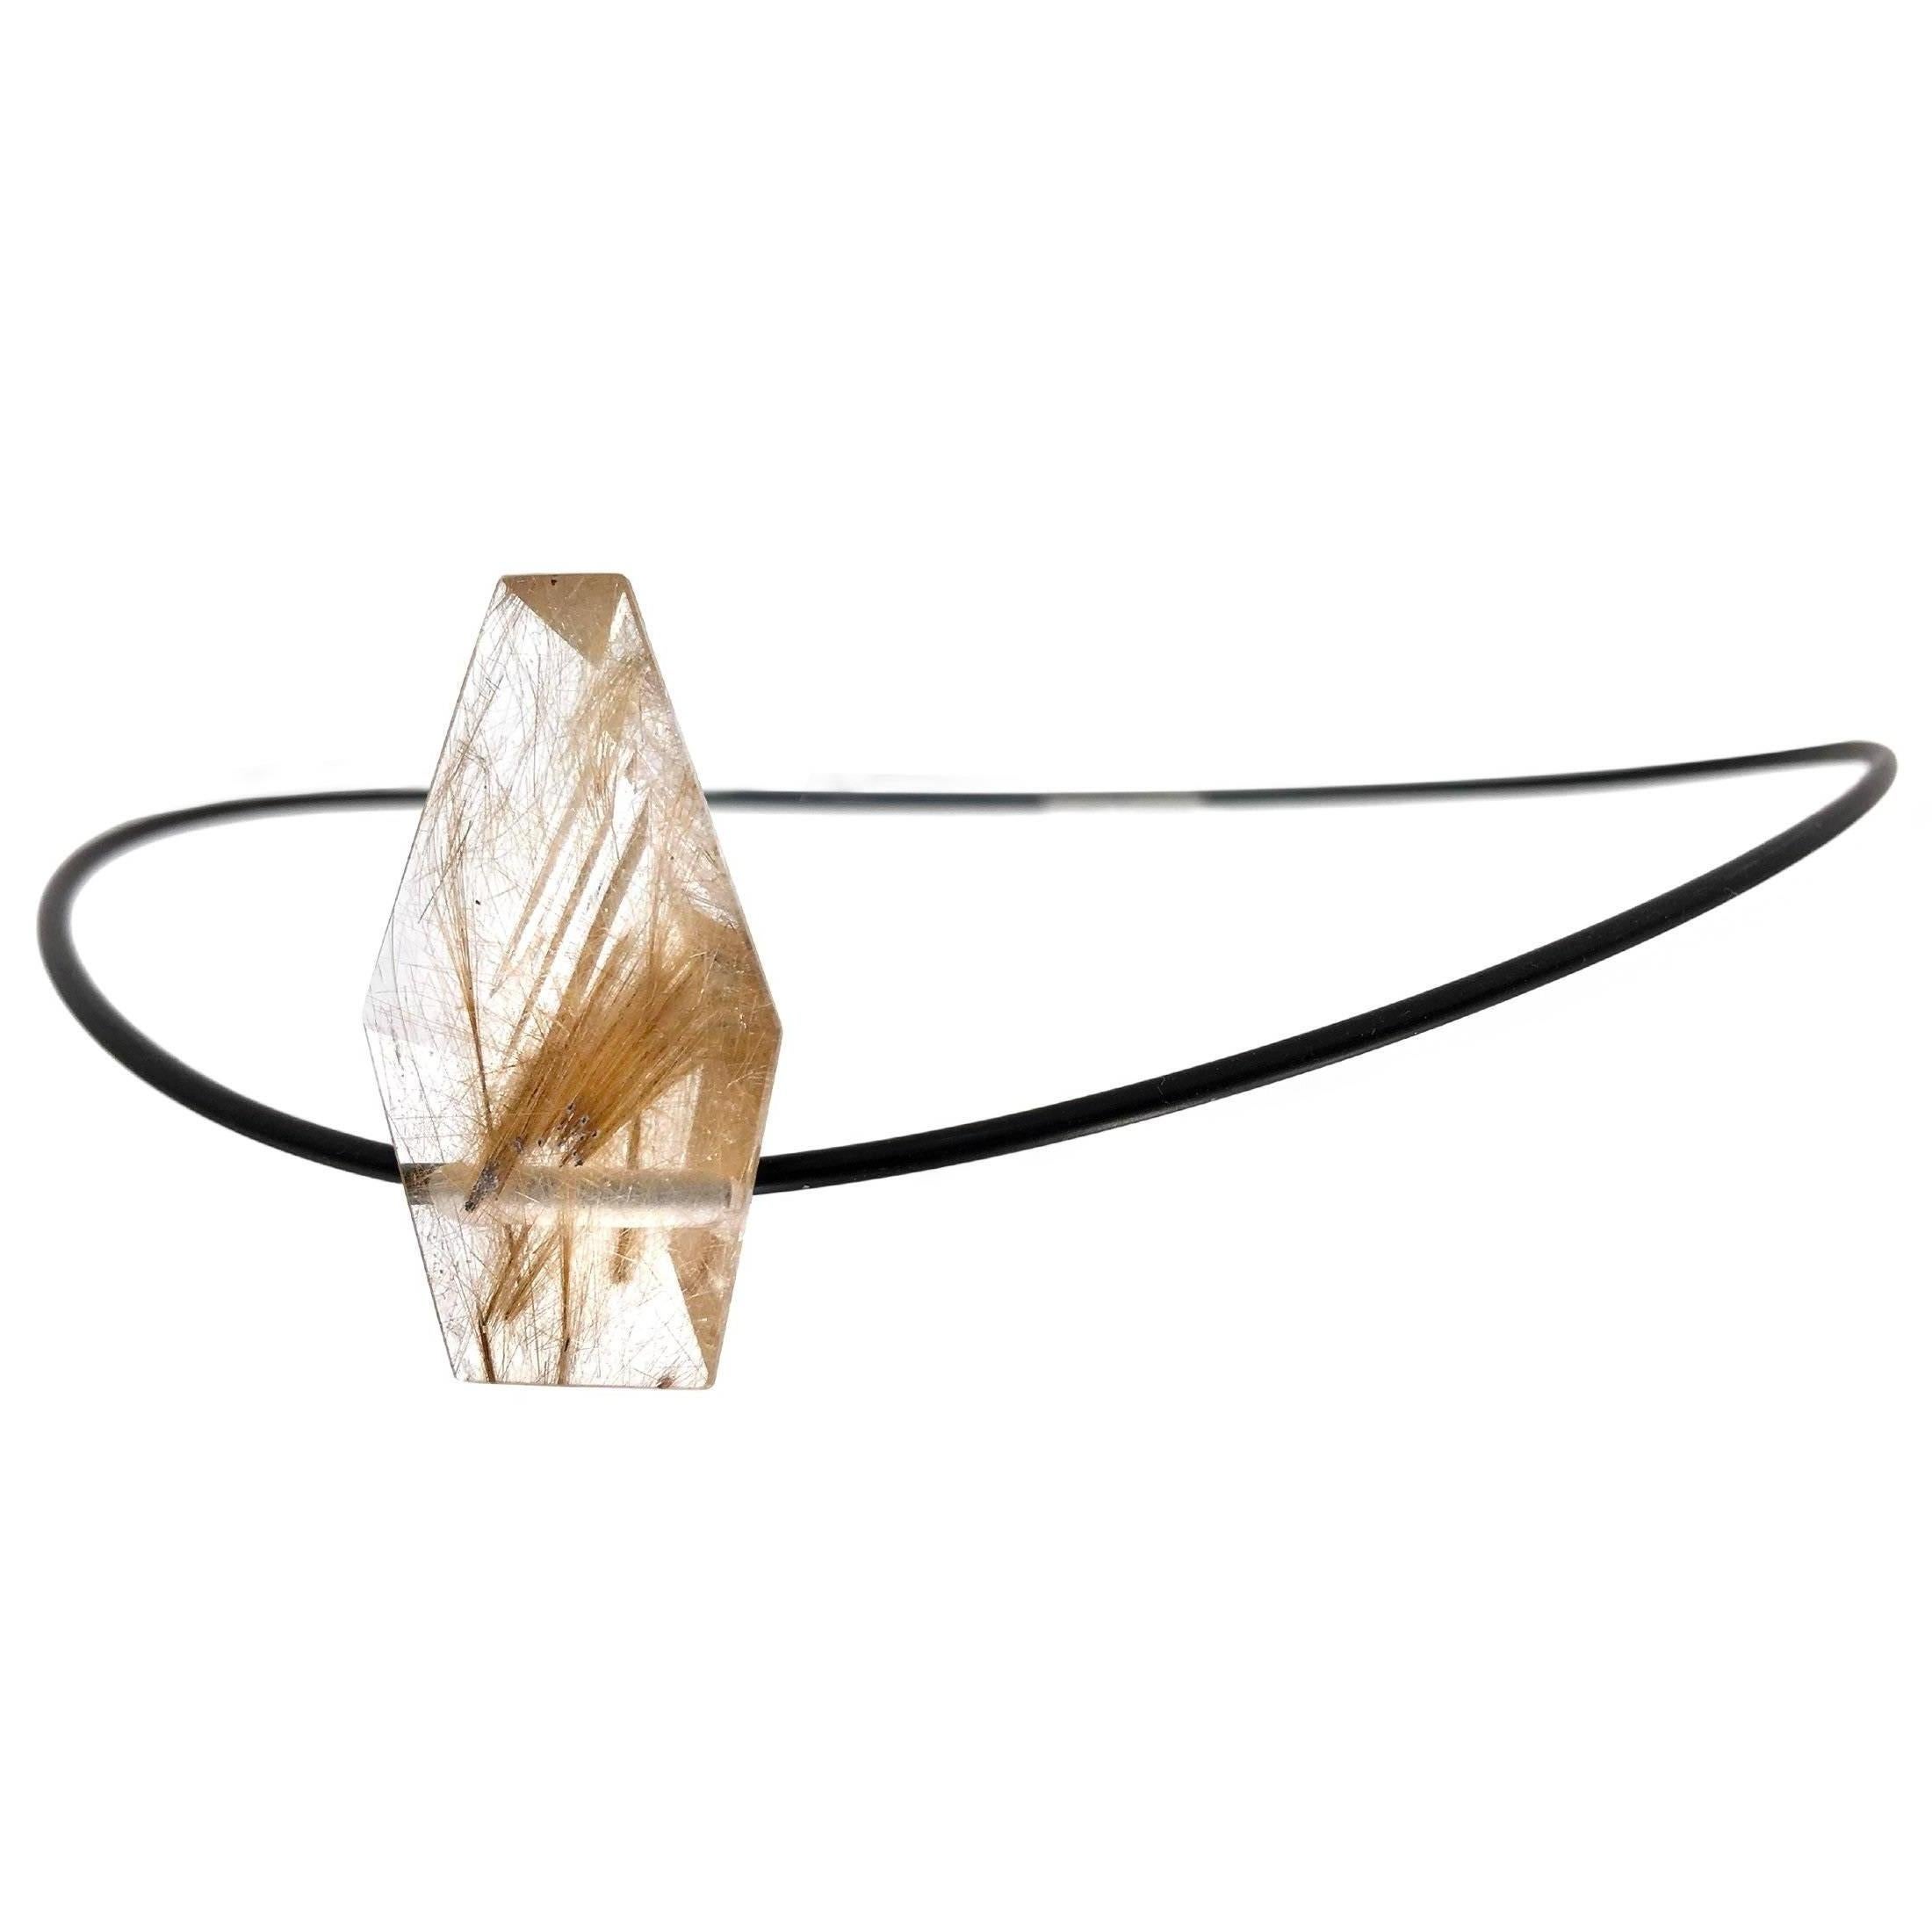 Crazy Horse Necklace featuring a 28.29 carat rutilated quartz hand-cut by master gemstone cutter Atelier Munsteiner on an 18 inch rubber cord with stainless steel bayonet closure. 